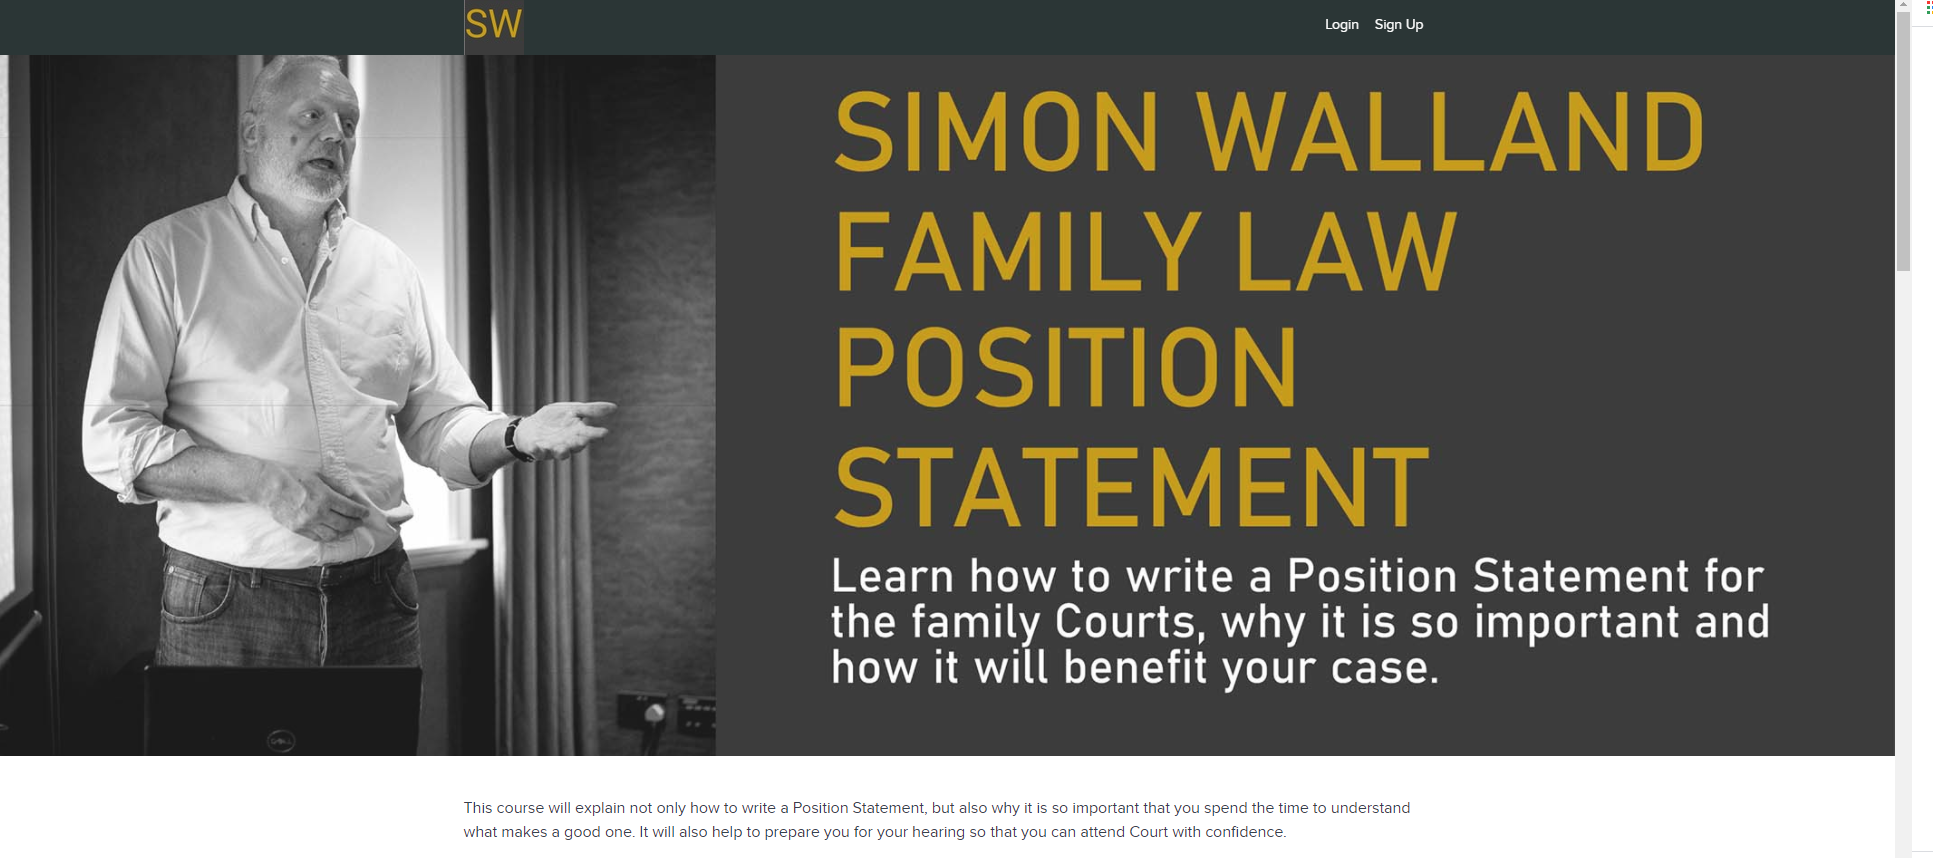 How to prepare for representing yourself in court Simon Walland Family Law